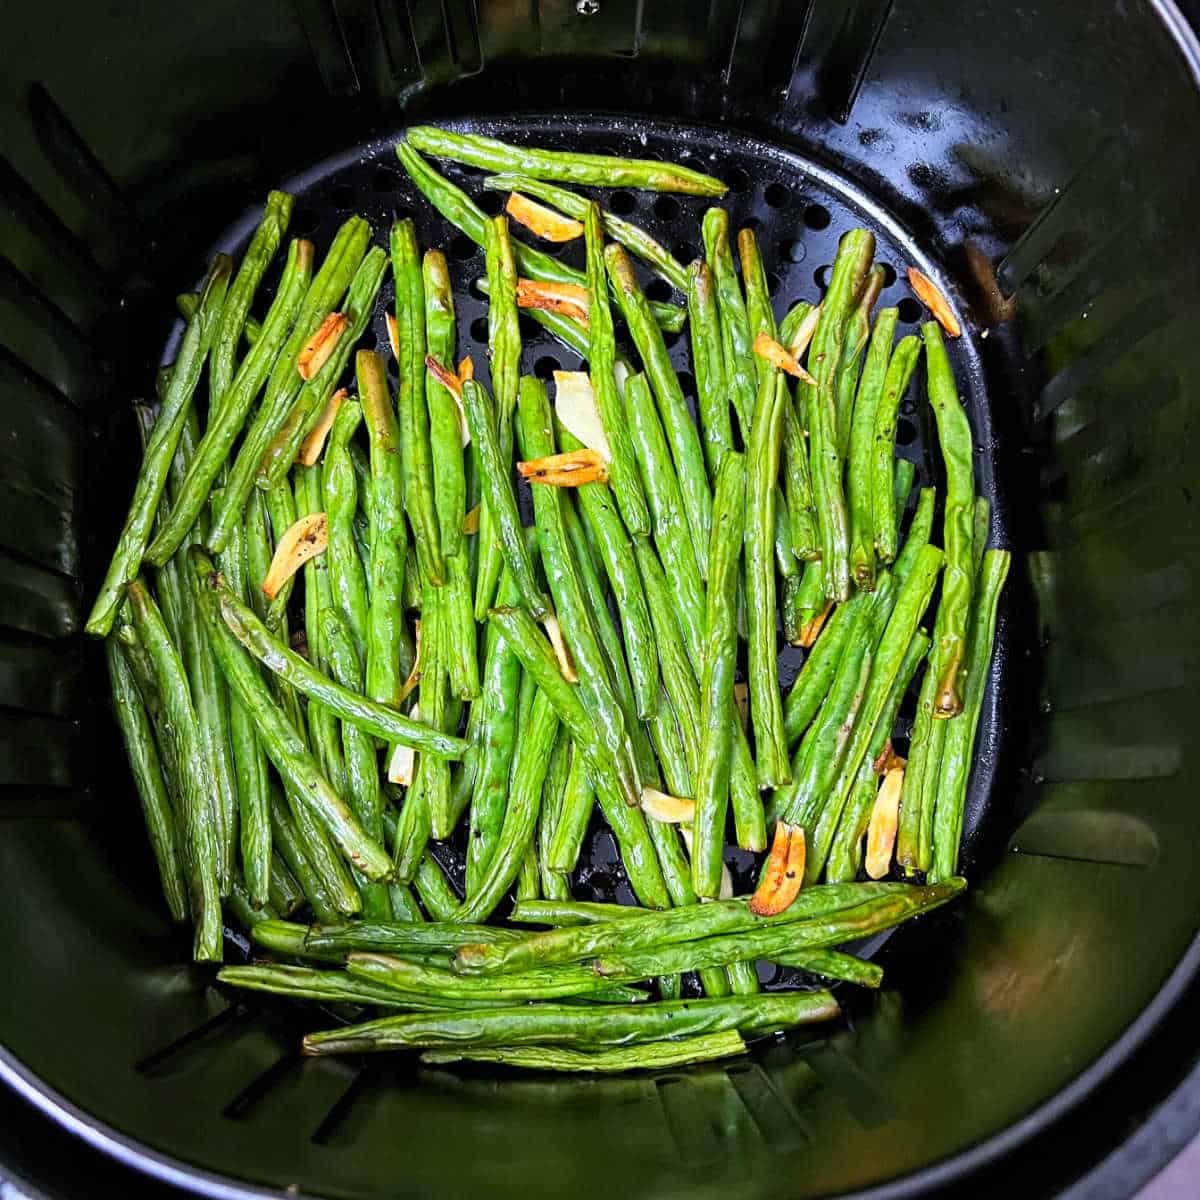 Air fried green beans placed in the air fryer basket.